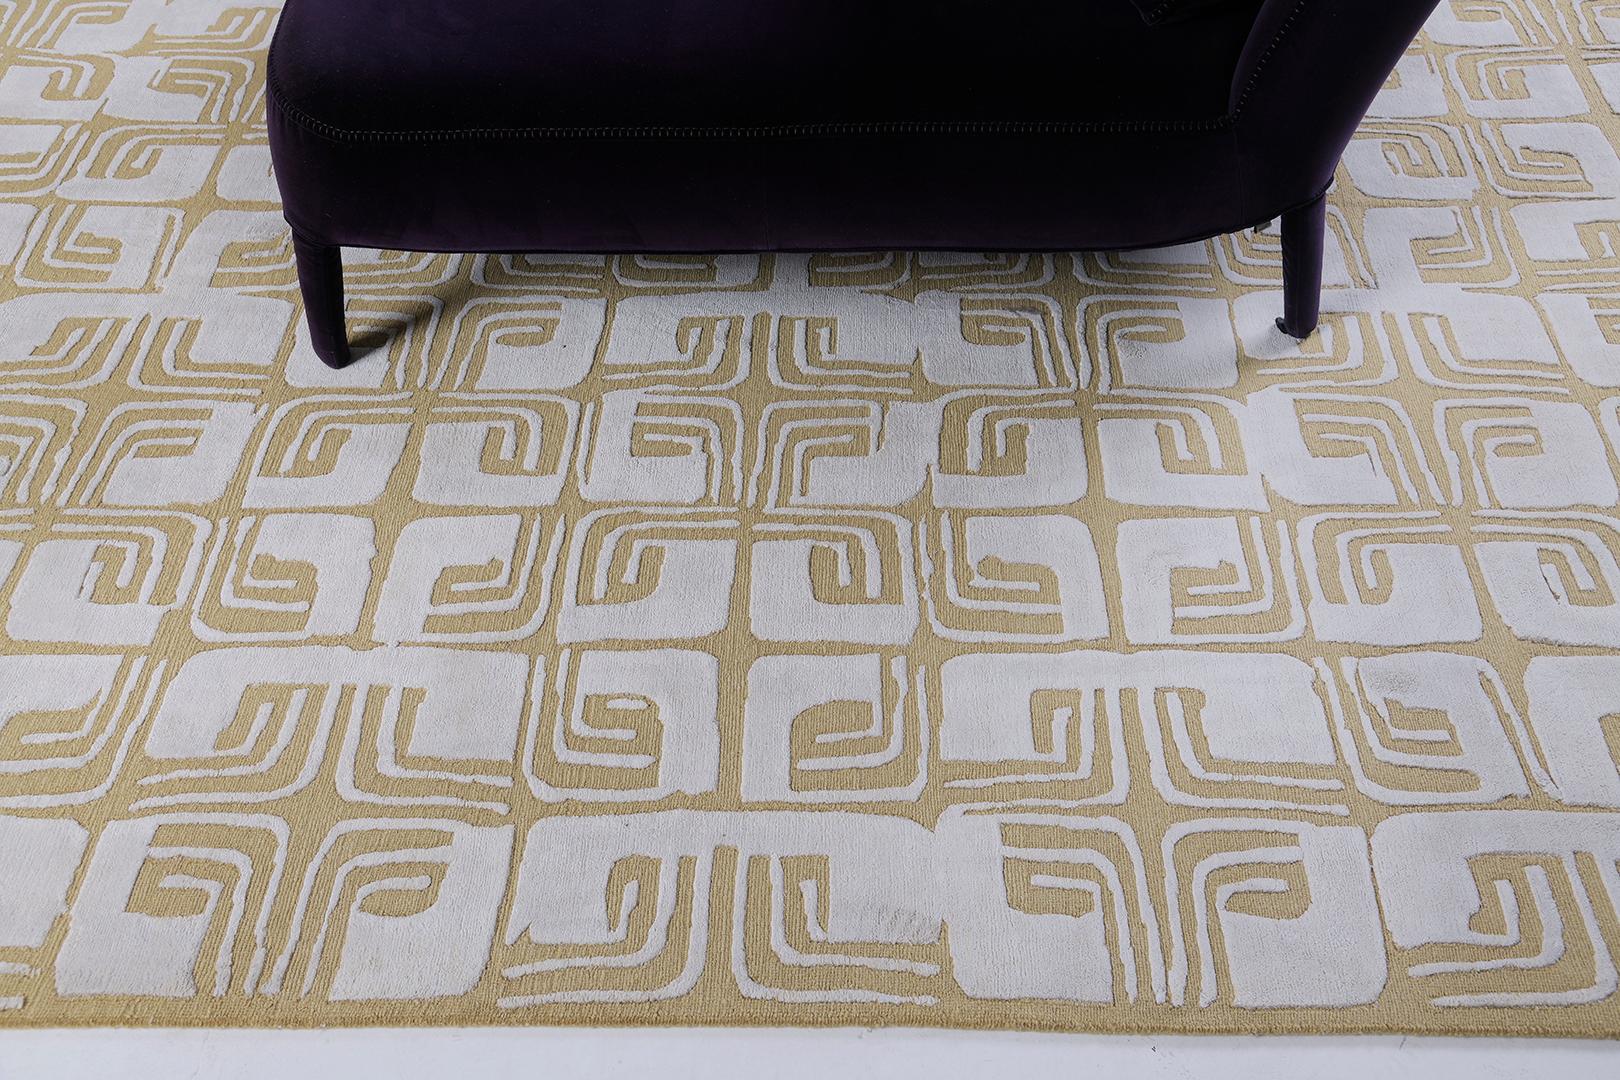 A florid maze repeat in shimmering silver silk and gold wool. The construction of the Anika rug brings together loop texture with sumptuously touchable silk.

Rug Number
29755
Size
9' 0